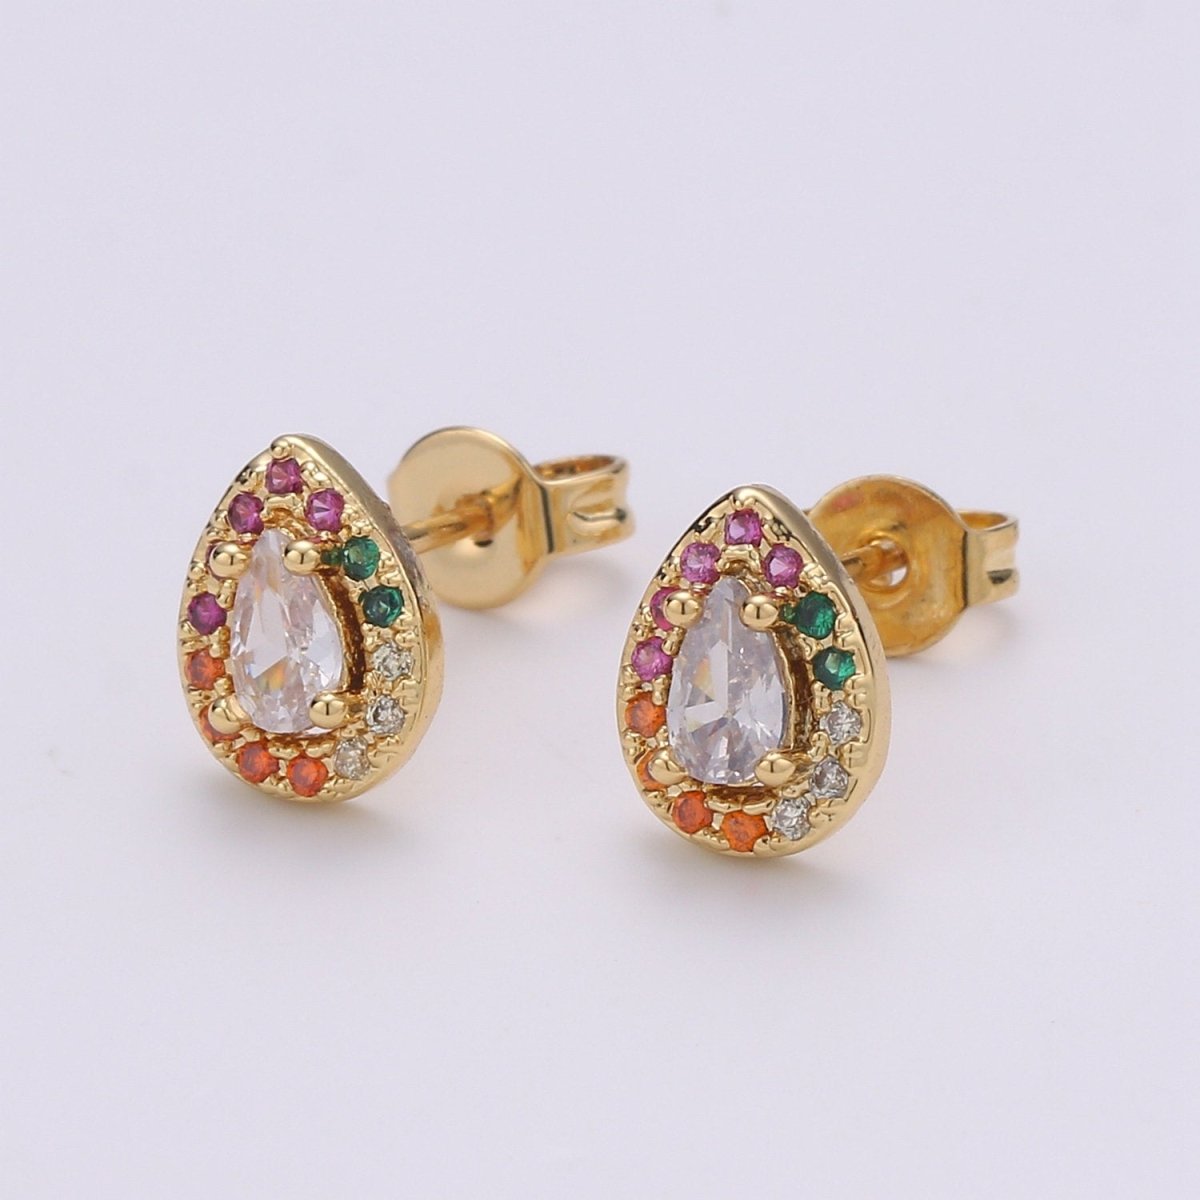 Colorful Gold Tiny Stud Earrings - Rainbow Micro Pave Studs - Dainty CZ Studs 10mm Tear Drop Crystal Small Stud Earrings Q-252 - DLUXCA